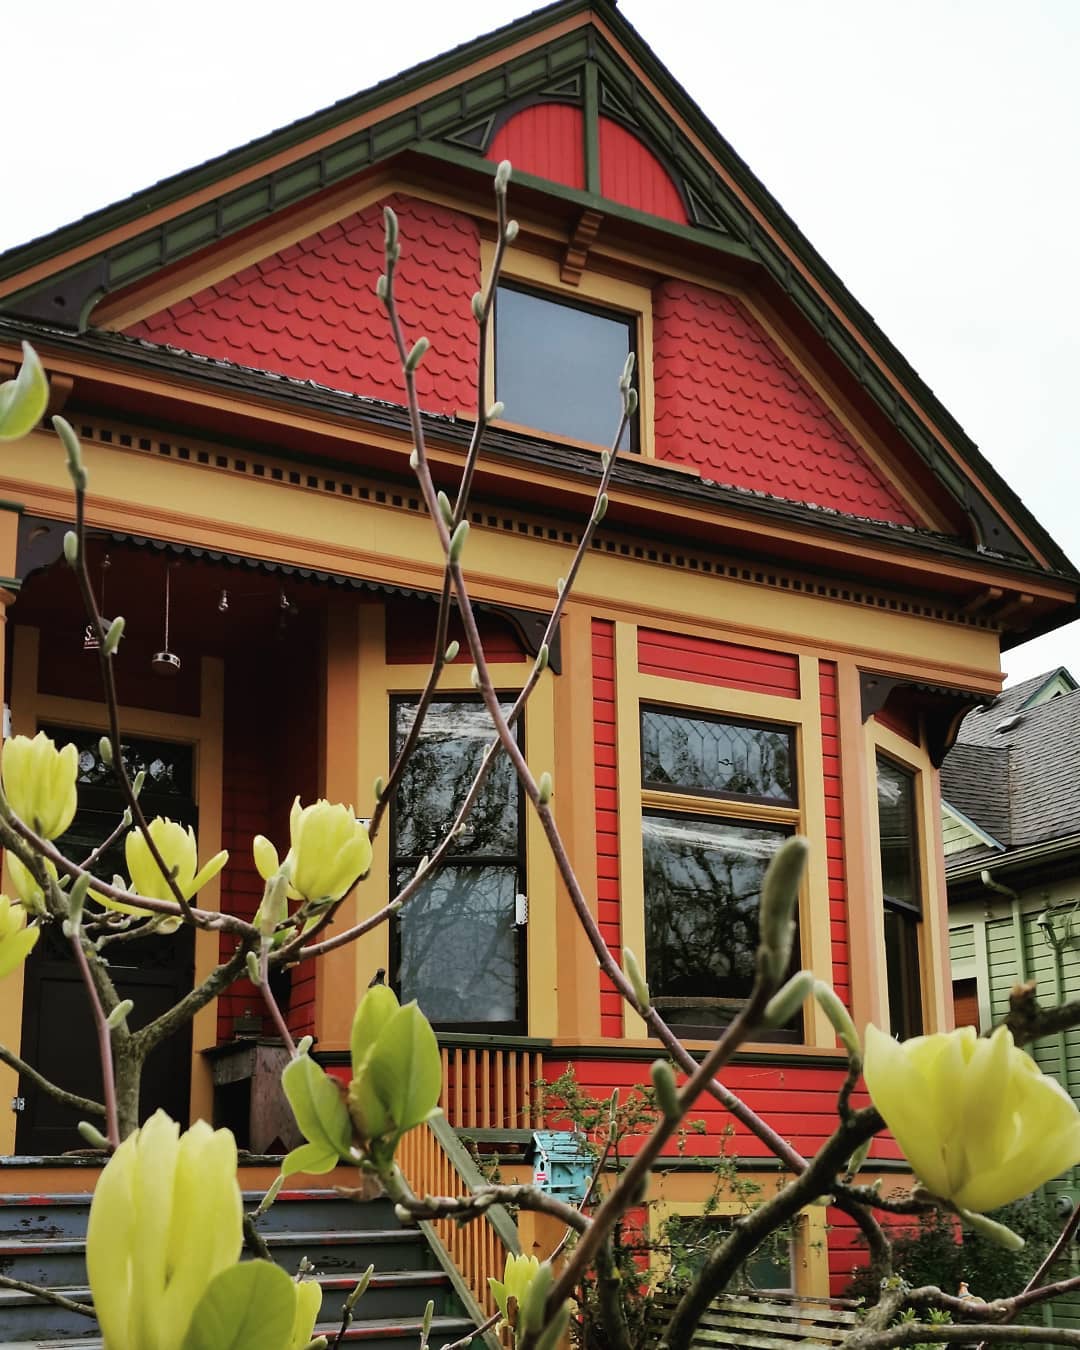 Front view of single-family home painted red with yellow trim and gray stairs with branches of flower bush in the foreground. Photo by Instagram user @wildwellnessguide